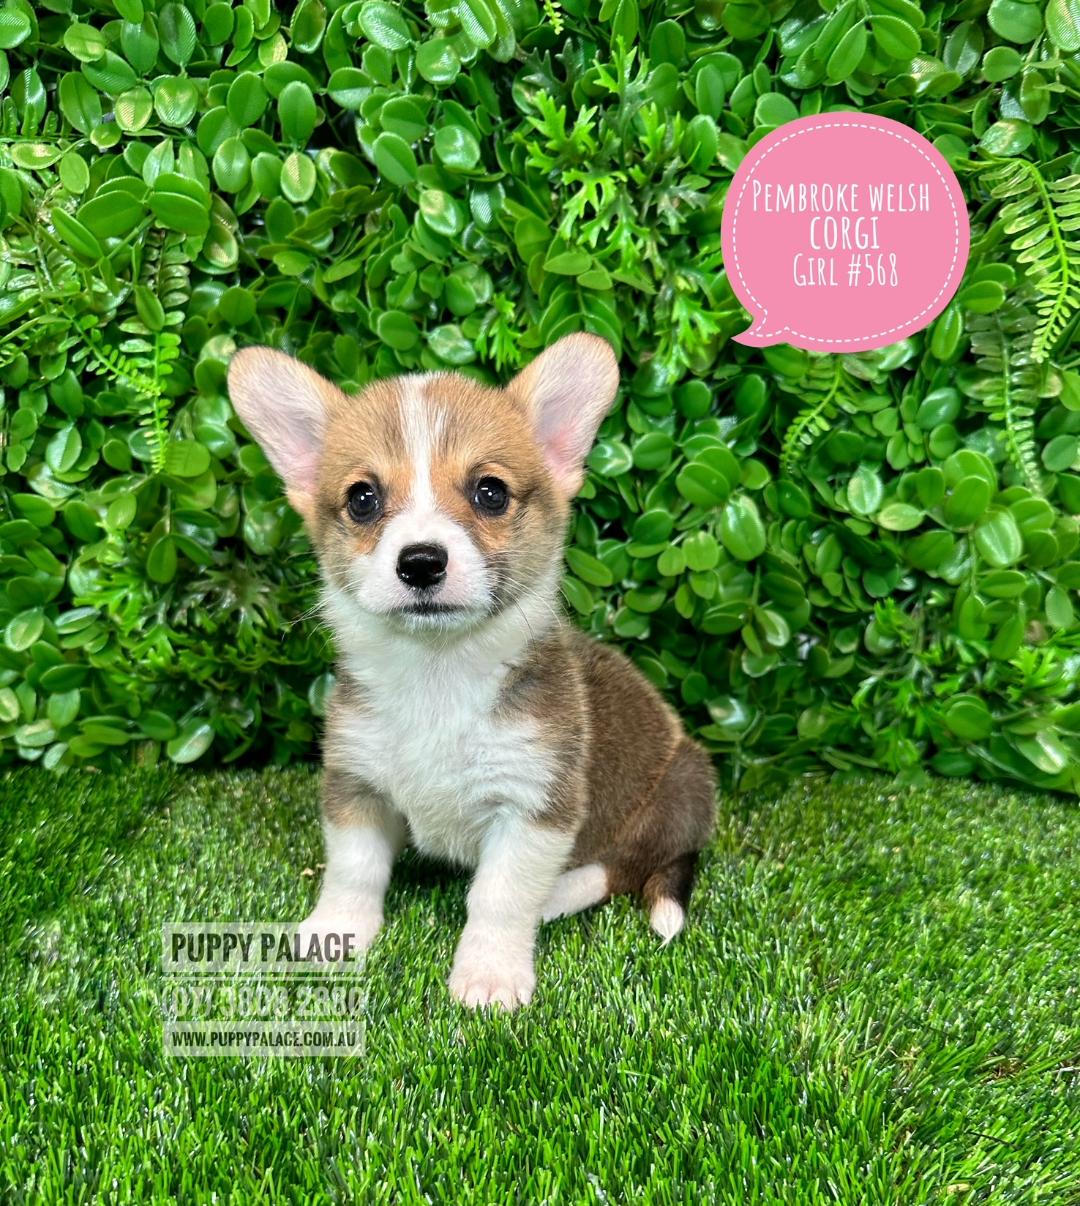 I HAVE NOW FOUND MY FUREVER HOME – Pembroke Welsh Corgi Puppies for sale Brisbane – Girl